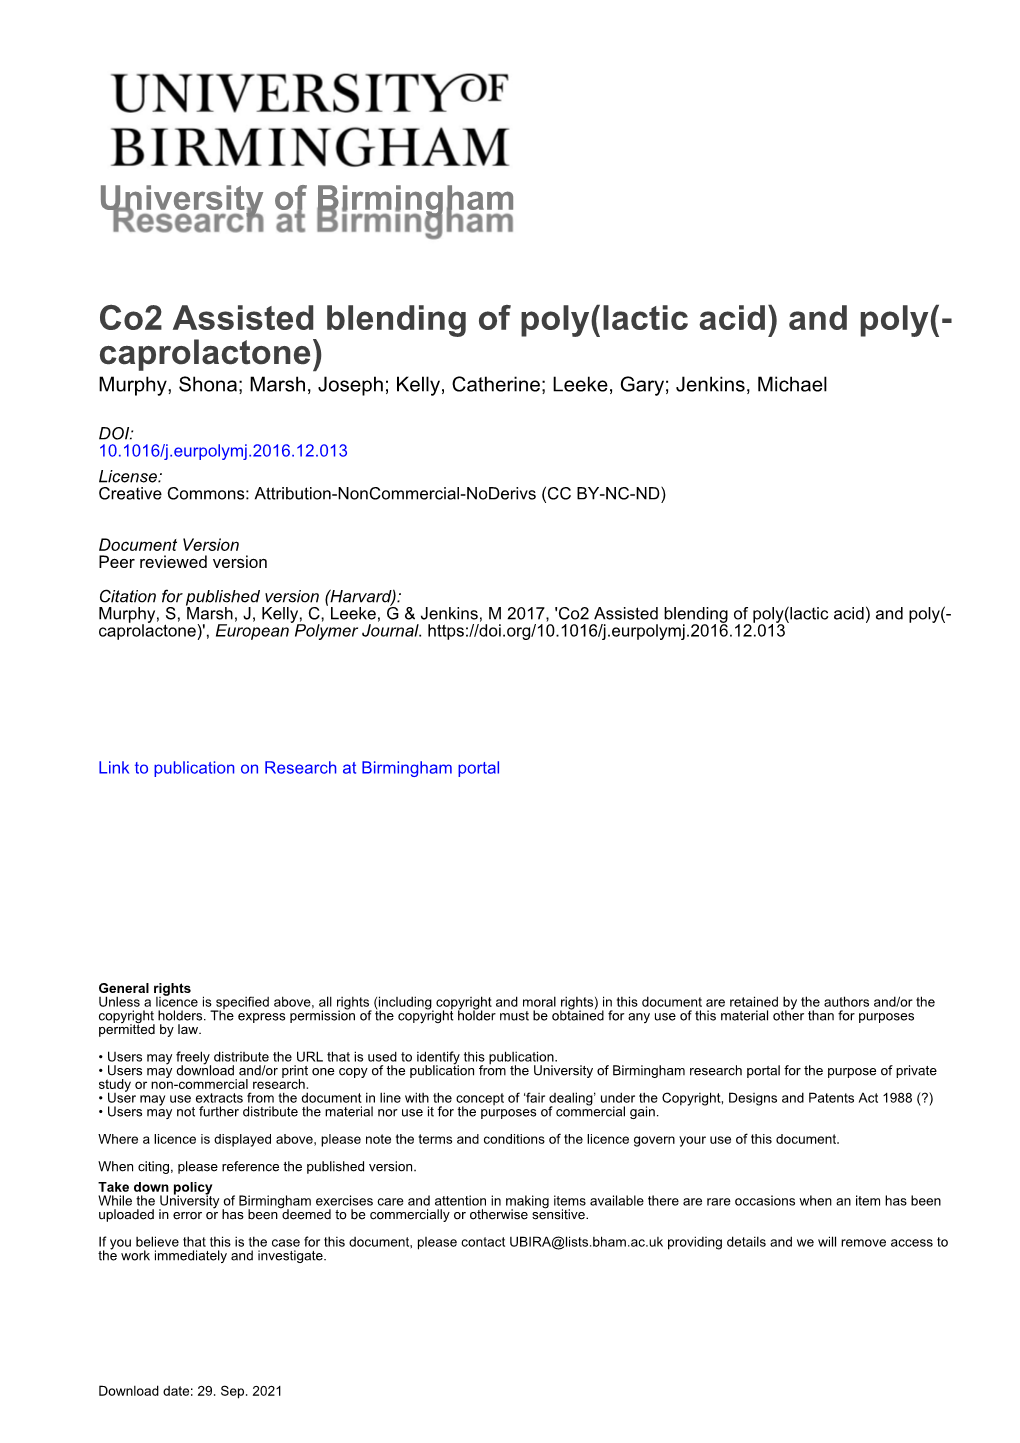 University of Birmingham Co2 Assisted Blending of Poly(Lactic Acid